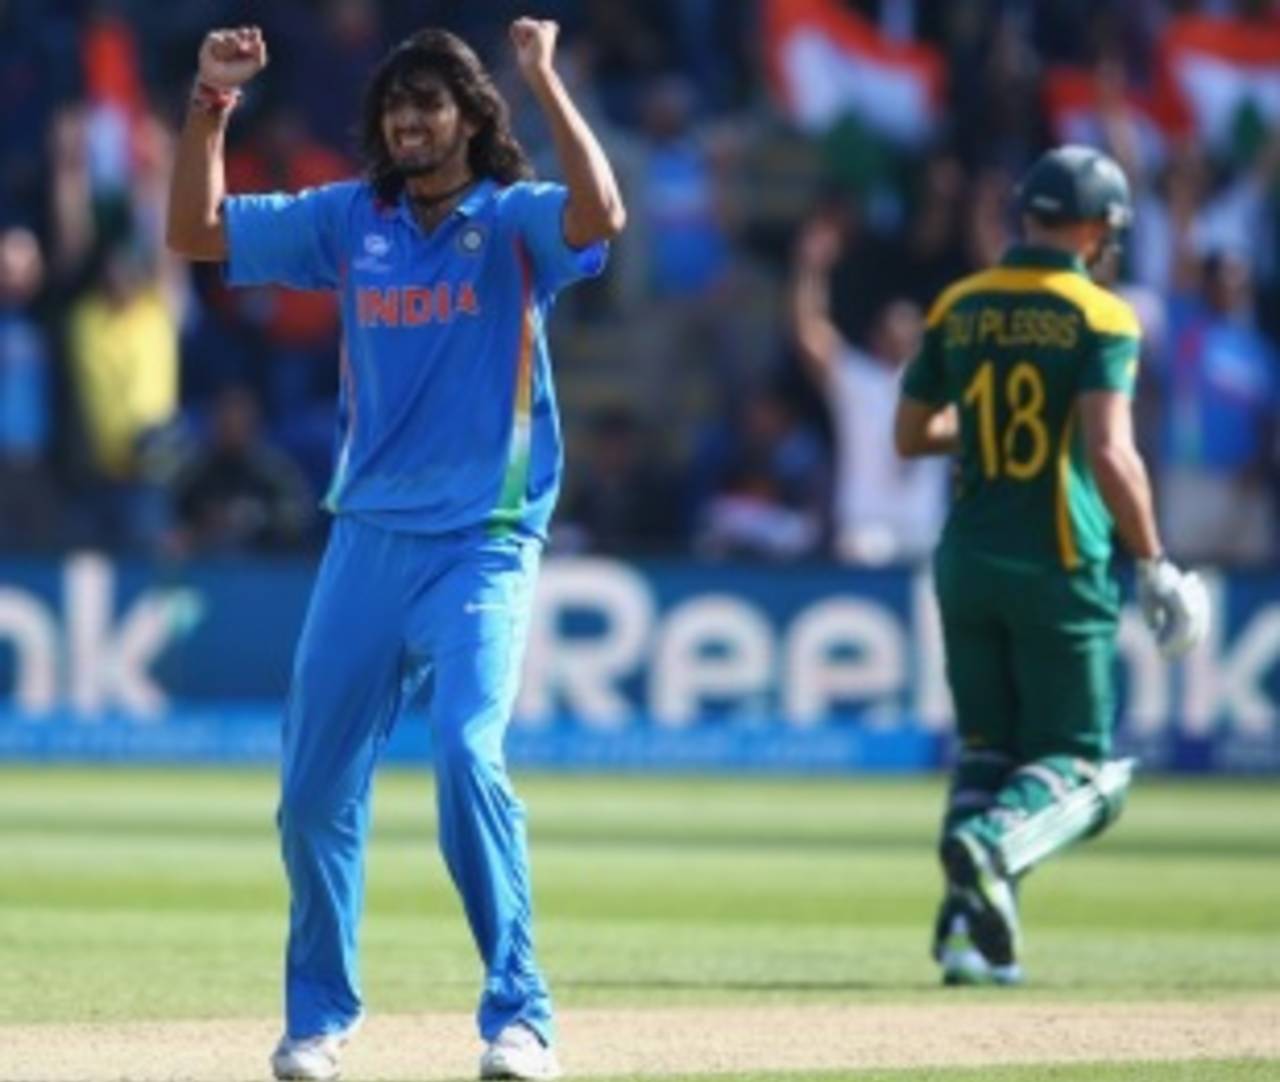 Ishant Sharma celebrates the wicket of Faf du Plessis, India v South Africa, Champions Trophy, Group B, Cardiff, June 6, 2013